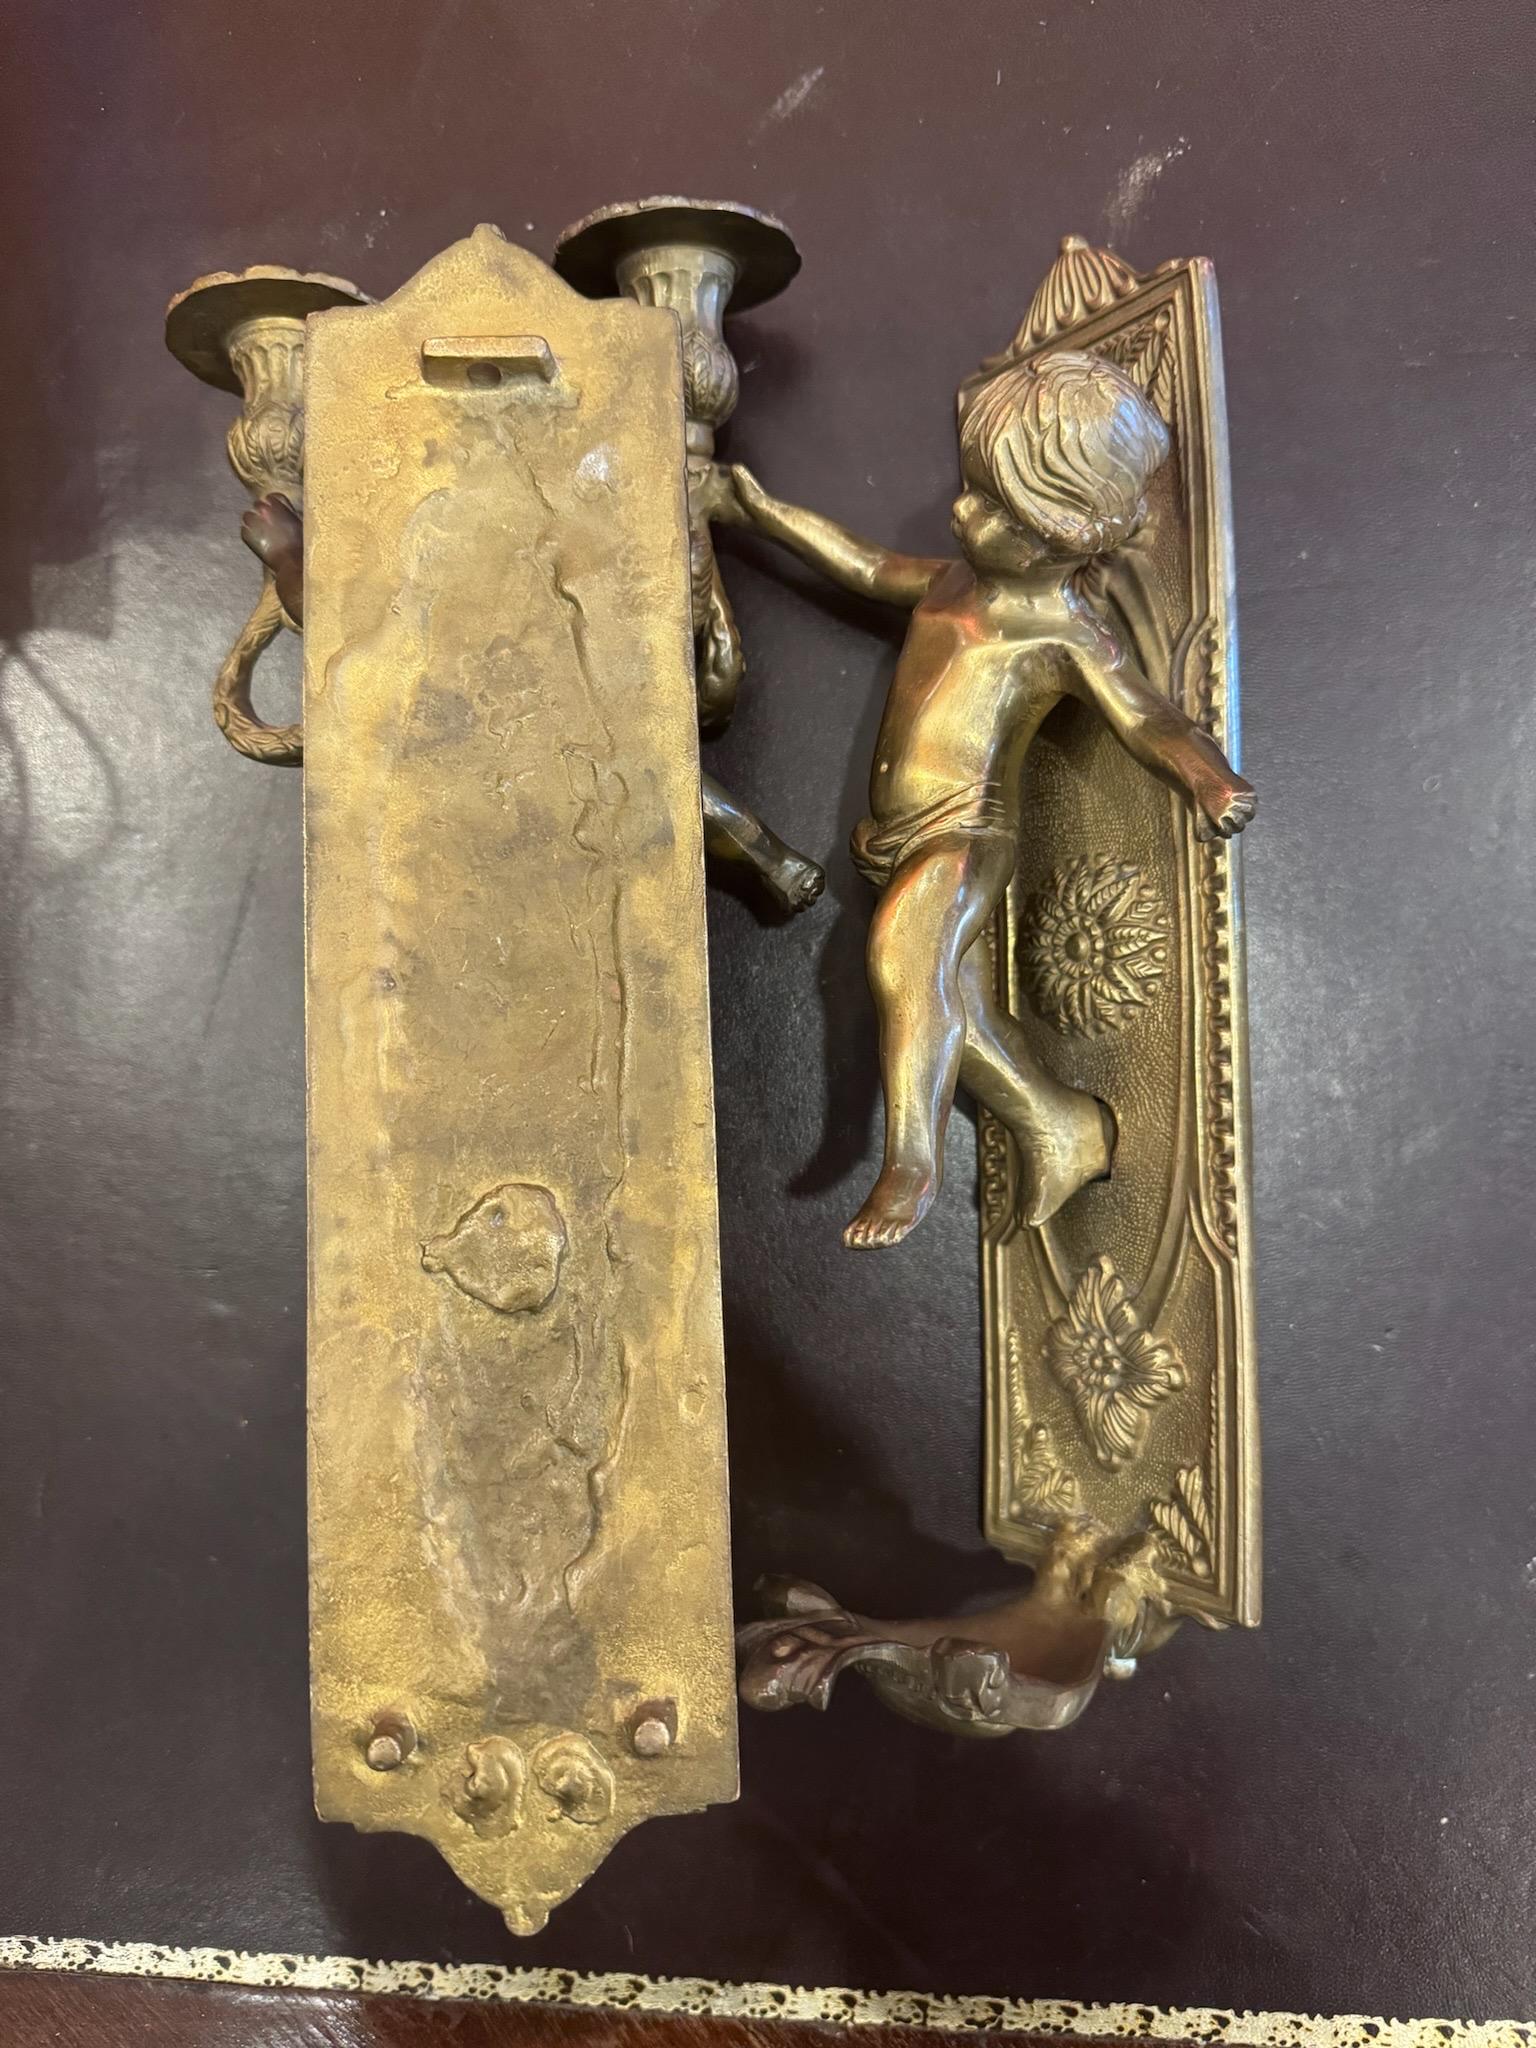 Unknown Vintage Brass Putti Cherub Angel Wall Mounted Sconces Candle Holders - Set of 2 For Sale